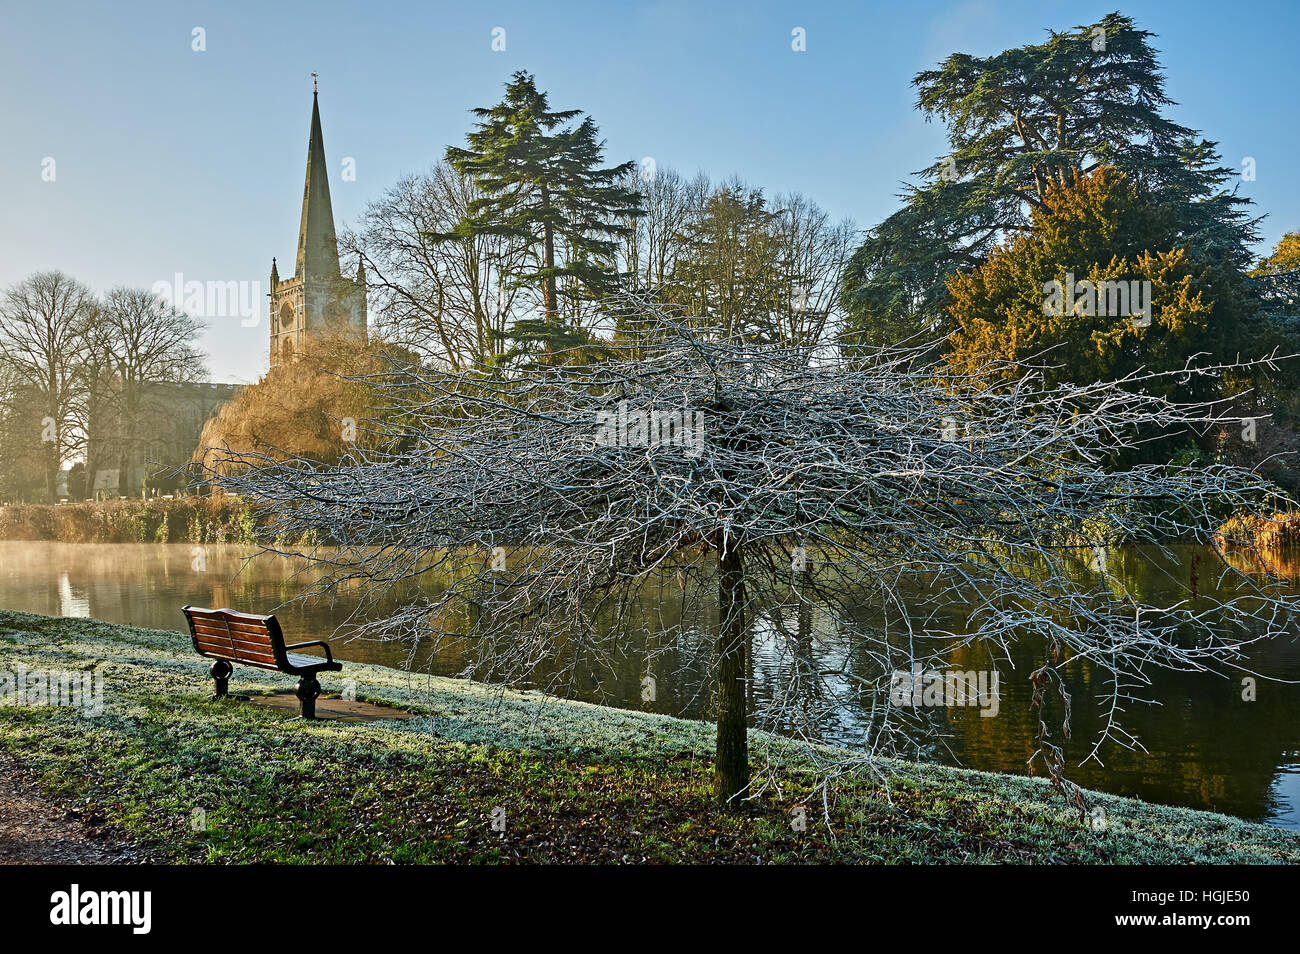 Holy Trinity church in Stratford upon Avon is the burial place of William Shakespeare and stands on the banks of the River Avon on a winter morning. Stock Photo